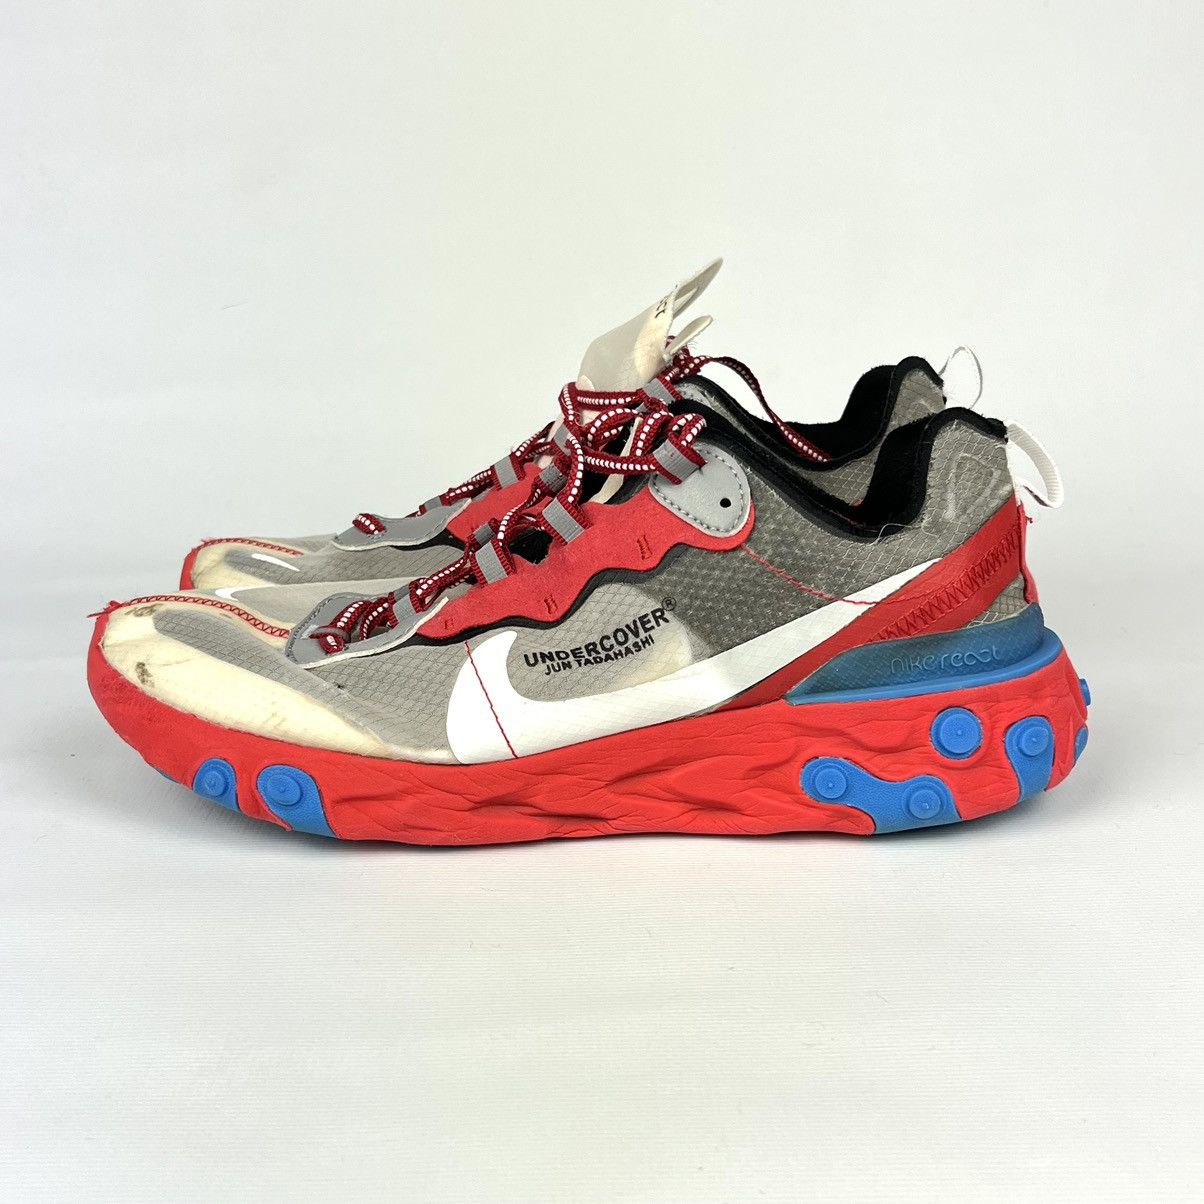 Undercover Nike x Undercover React Element 97 - US8 | Grailed